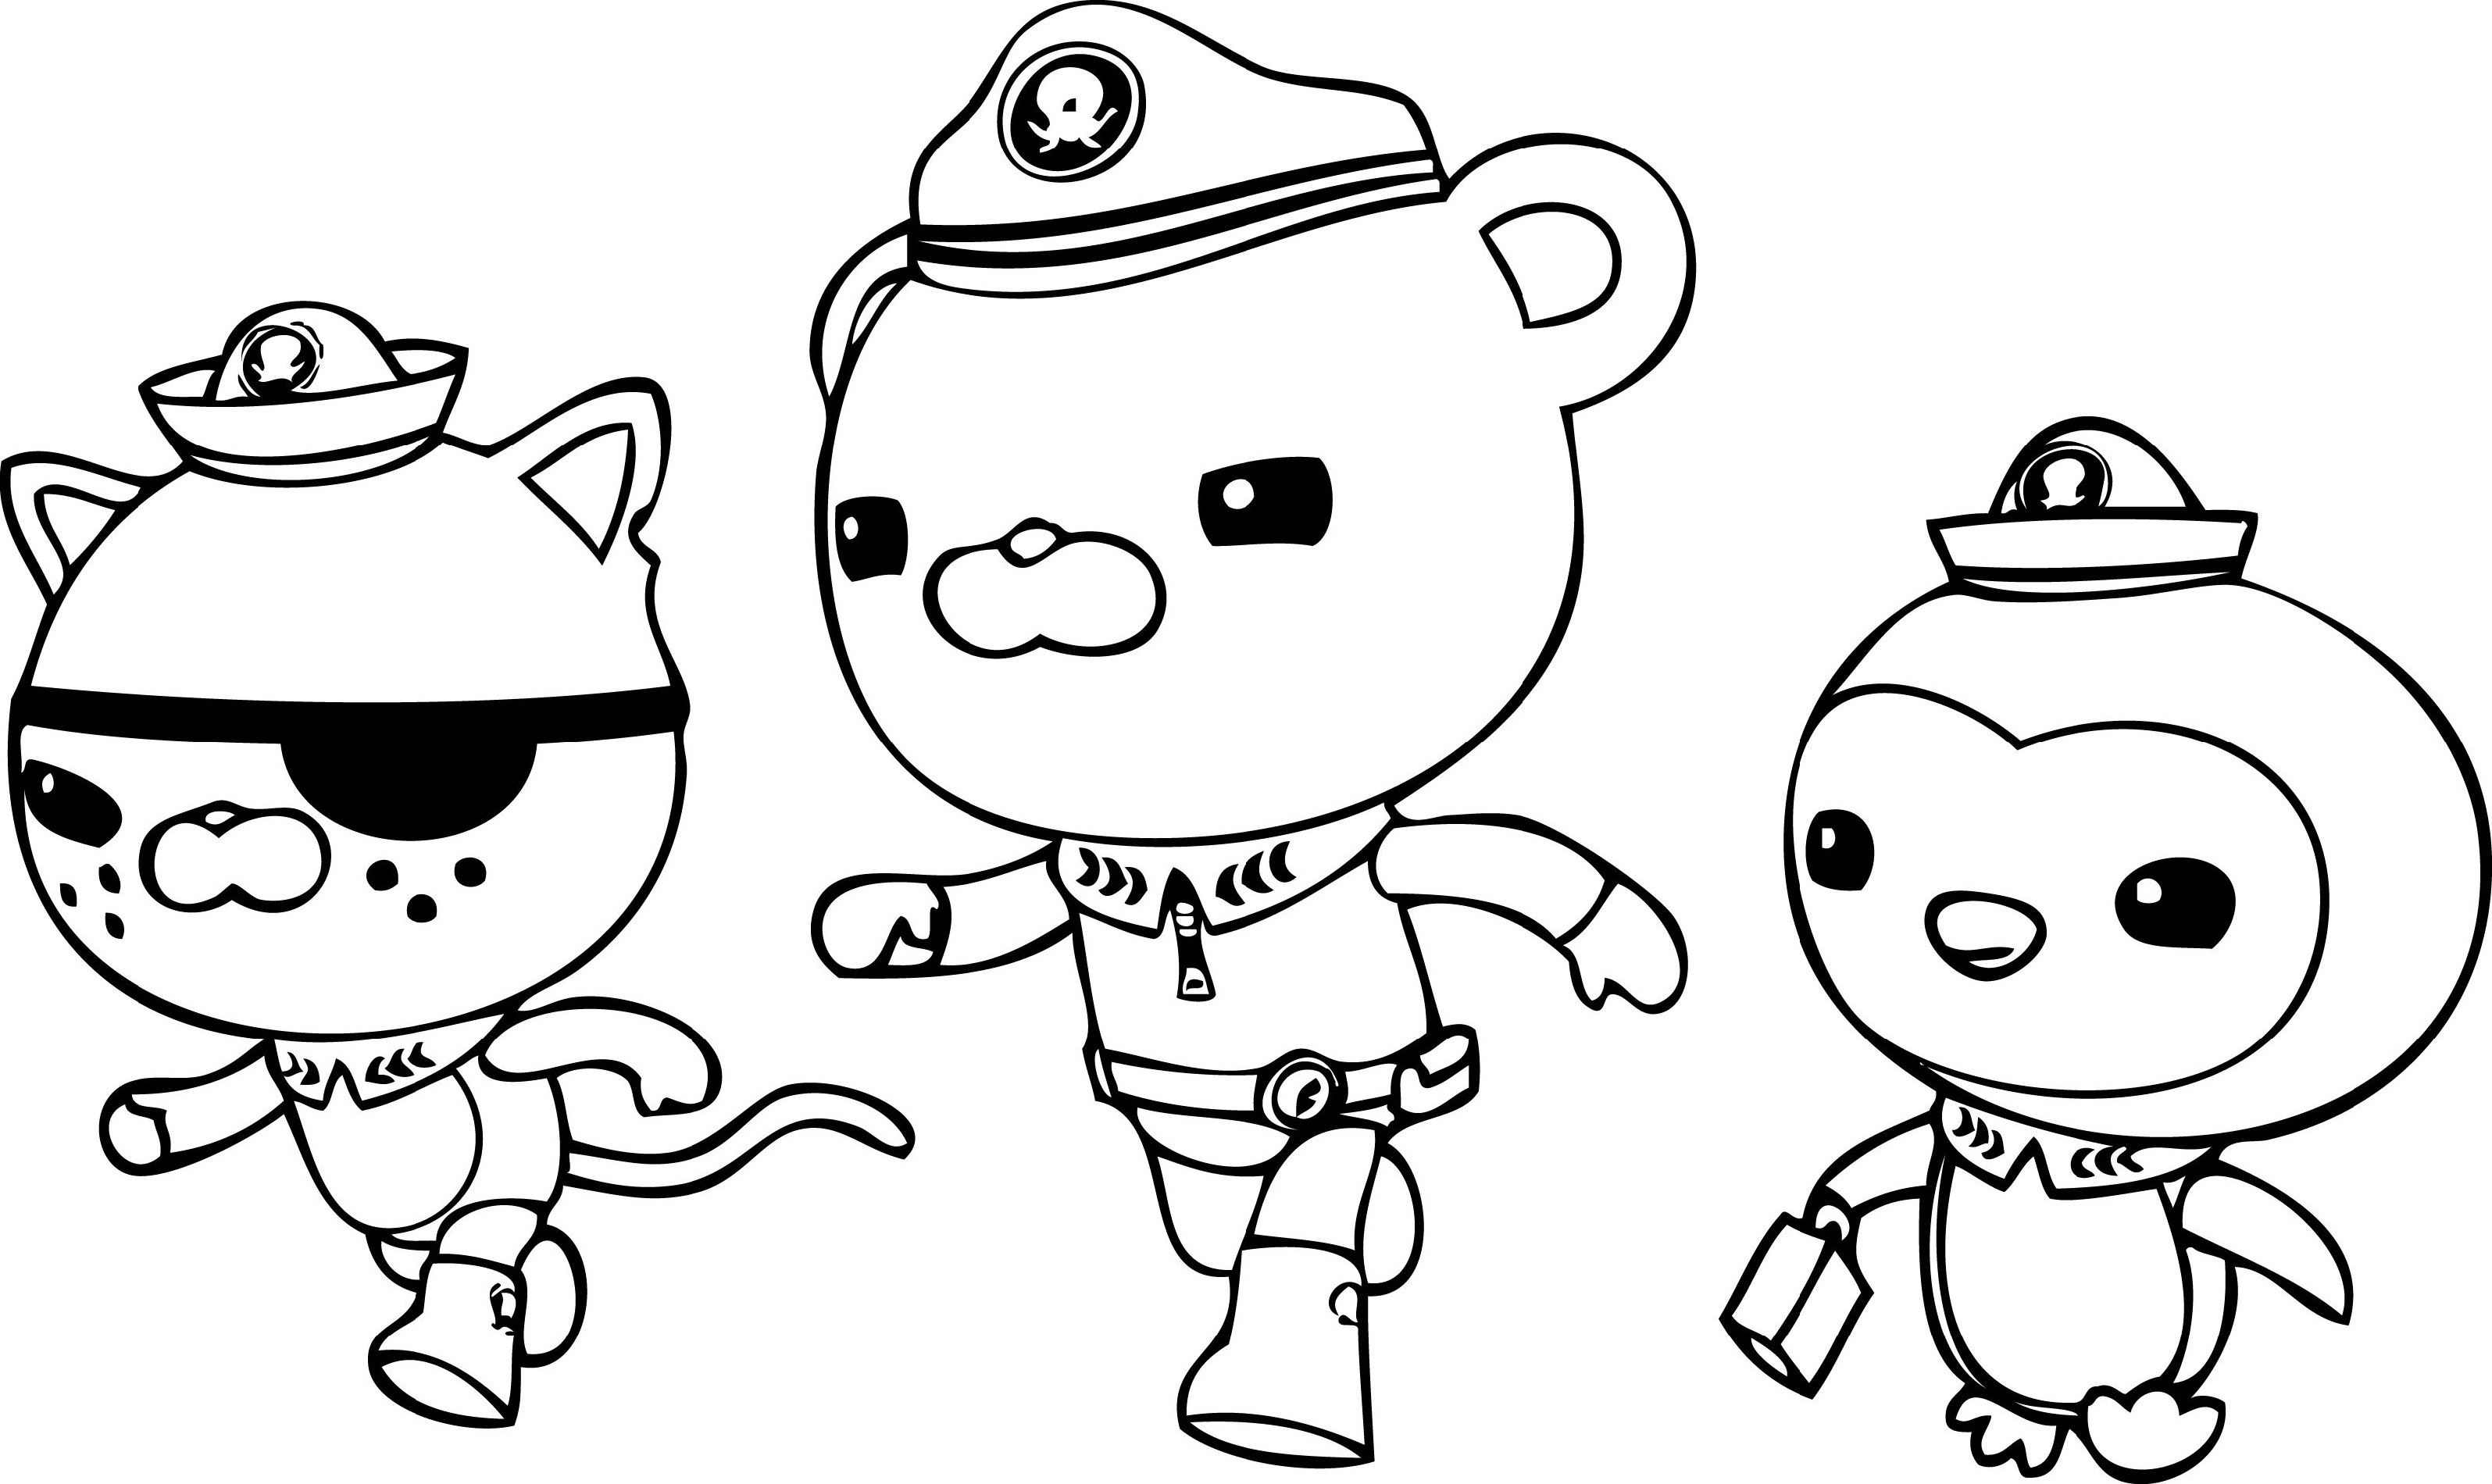 Captain Barnacles Coloring Pages Coloring Ideas Excelent Octonauts Coloring Pages Image Ideas For